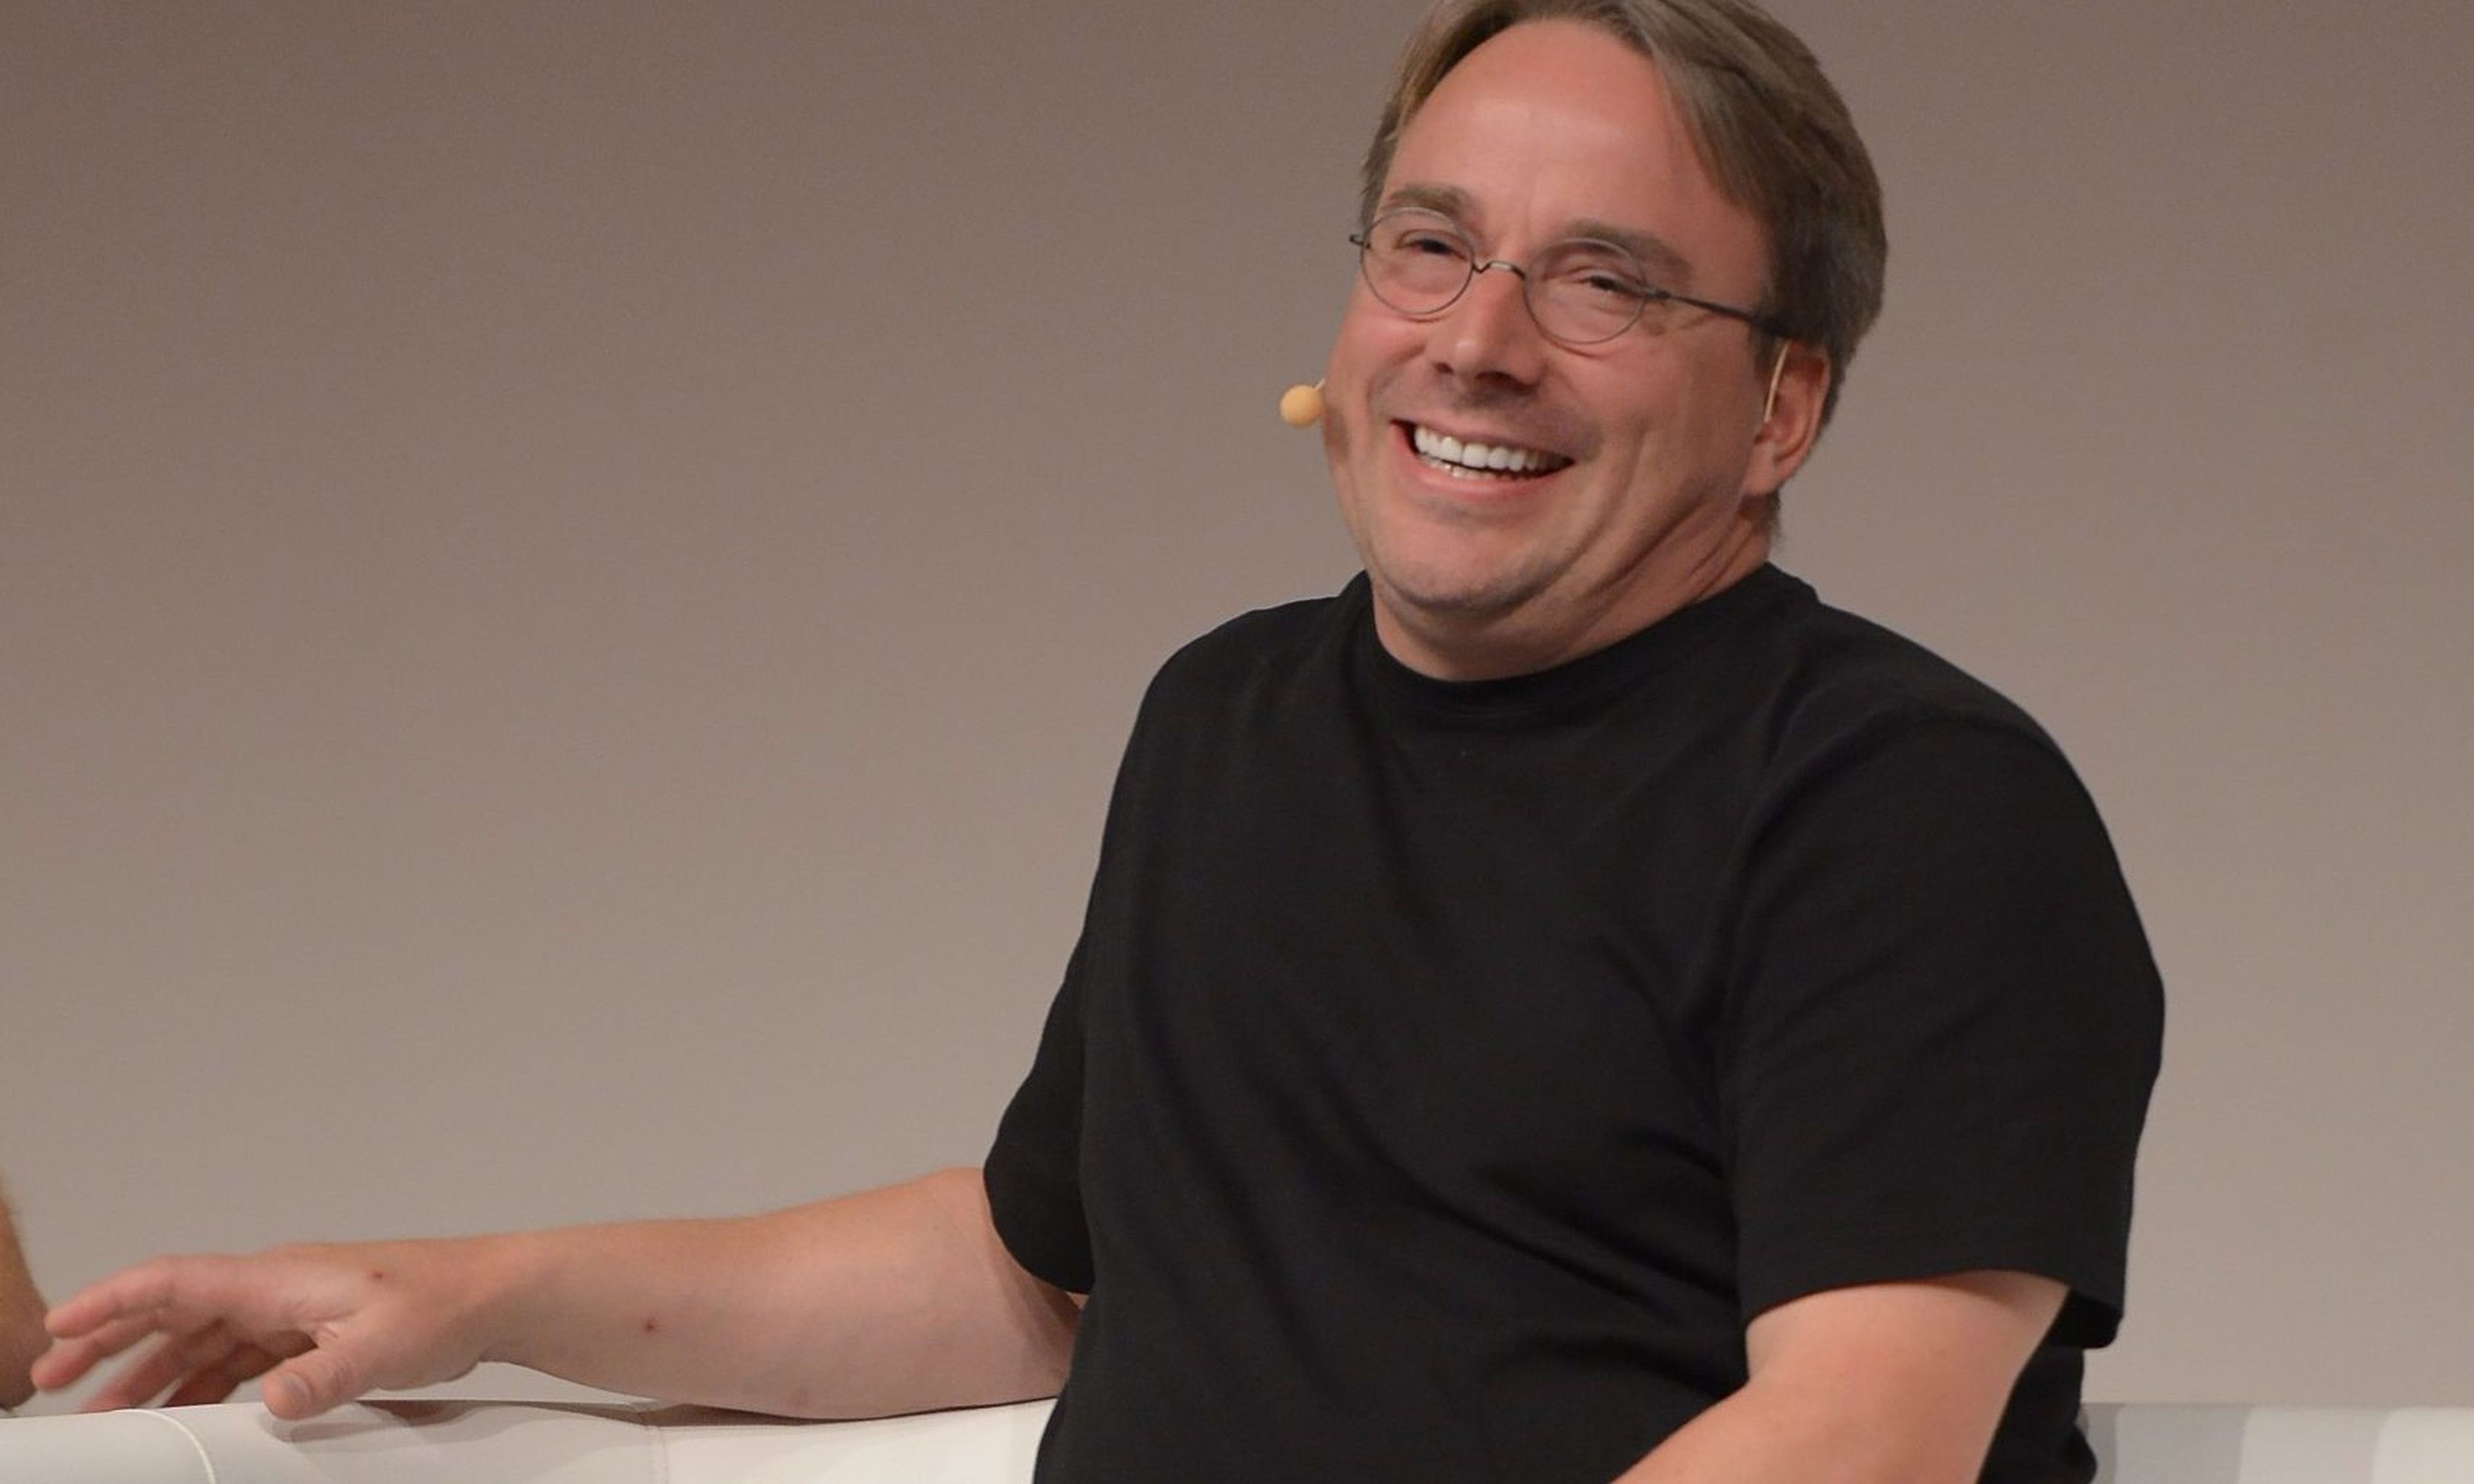 Linus Torvalds speaking at the LinuxCon Europe 2014 in Düsseldorf. (File:LinuxCon Europe Linus Torvalds 03.jpg&#8221; by Krd is licensed under CC BY-SA 4.0)